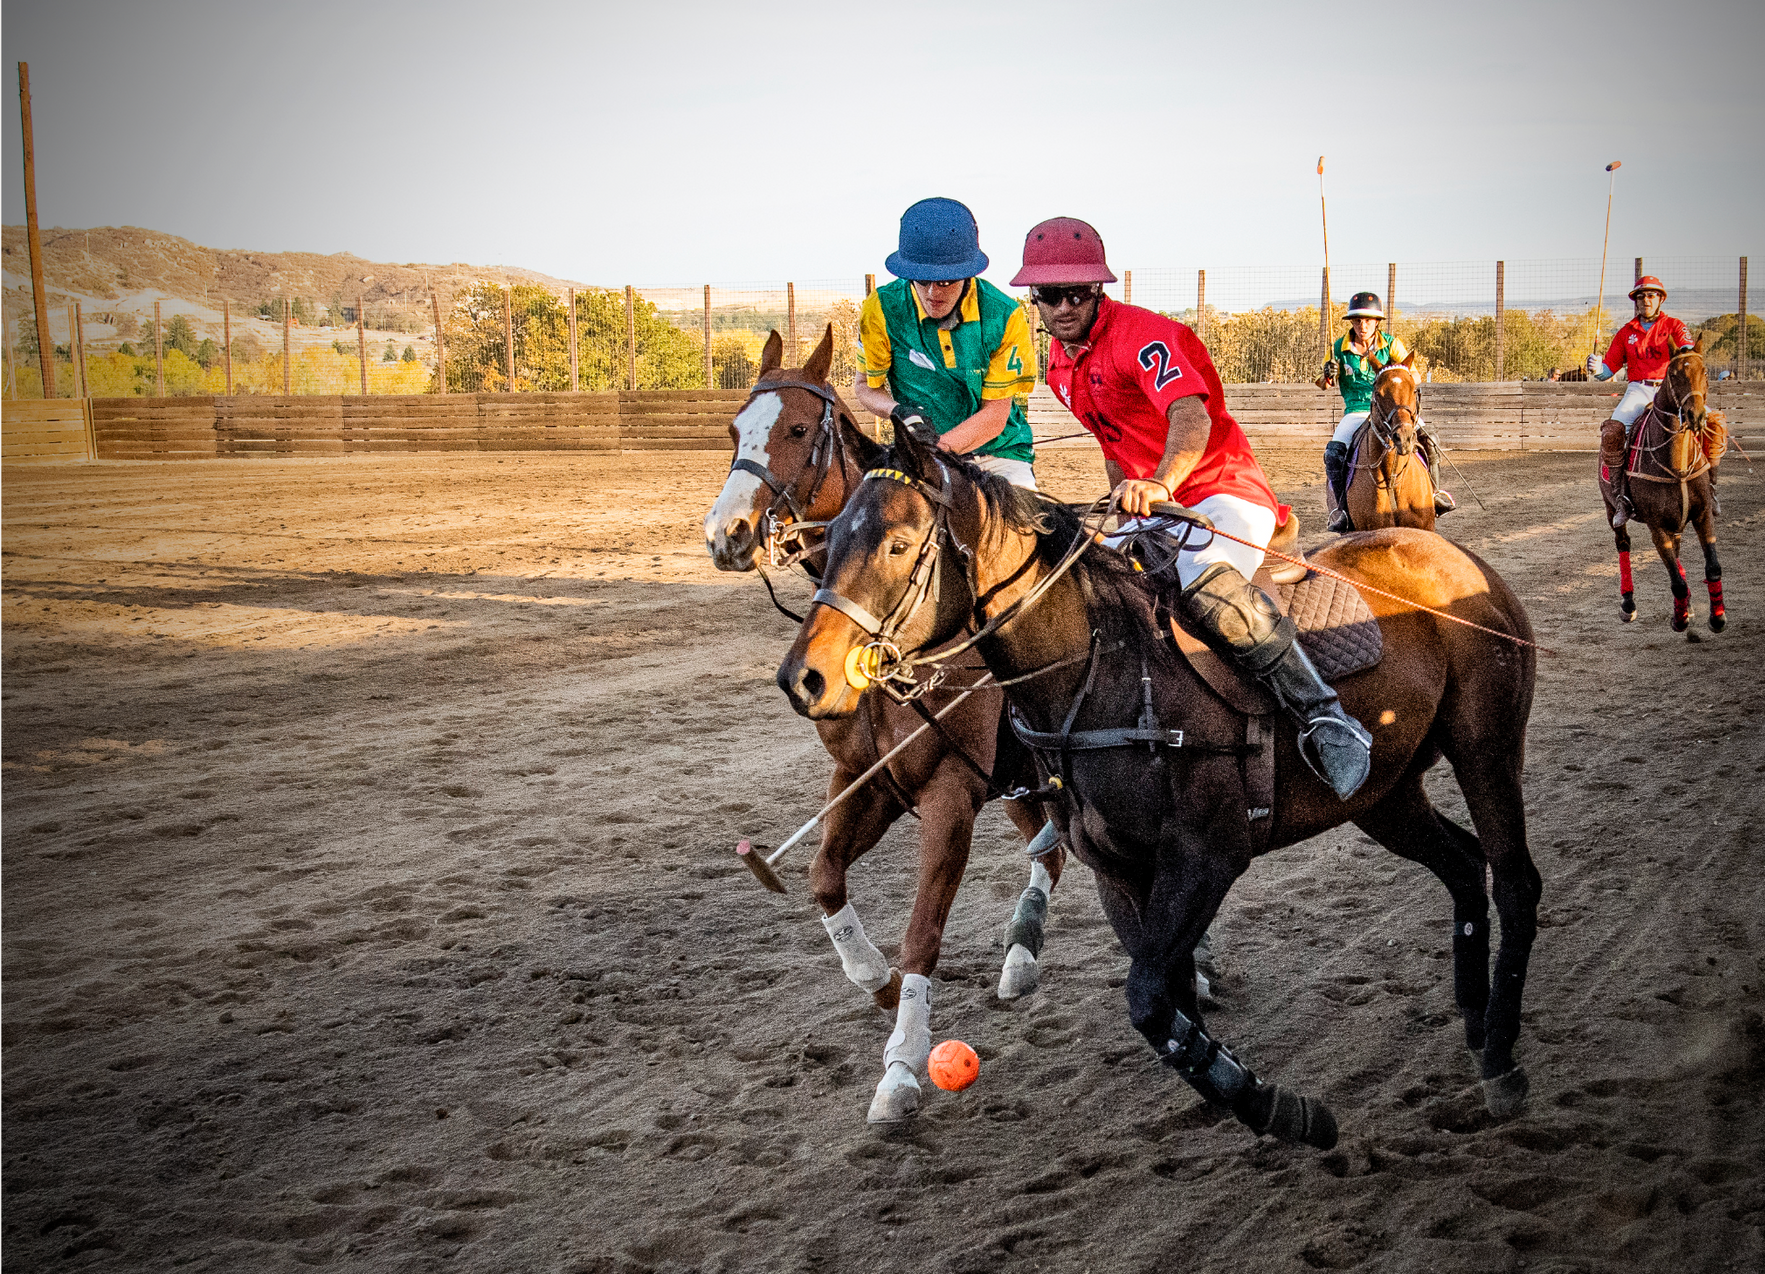 A group of people are playing polo on horses in a dirt field.